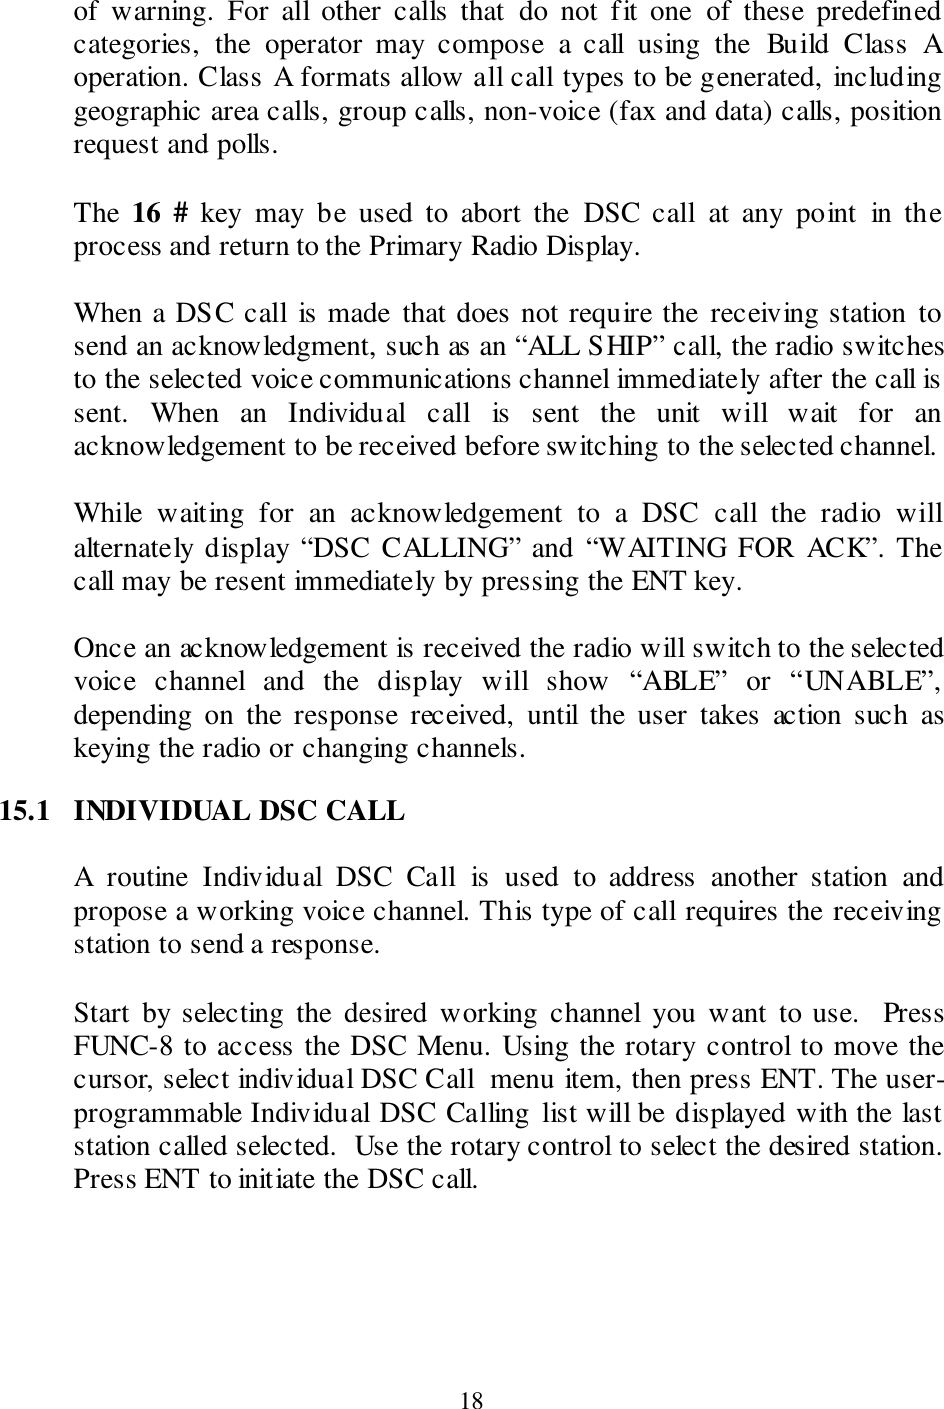  18 of  warning.  For  all  other  calls  that  do  not  fit  one  of  these  predefined categories,  the  operator  may  compose  a  call  using  the  Build  Class  A operation. Class A formats allow all call types to be generated, including geographic area calls, group calls, non-voice (fax and data) calls, position request and polls.  The  16  #  key  may  be  used  to  abort  the  DSC  call  at  any  point  in  the process and return to the Primary Radio Display.  When a DSC call  is made that does not require the receiving station to send an acknowledgment, such as an “ALL SHIP” call, the radio switches to the selected voice communications channel immediately after the call is sent.  When  an  Individual  call  is  sent  the  unit  will  wait  for  an acknowledgement to be received before switching to the selected channel.   While  waiting  for  an  acknowledgement  to  a  DSC  call  the  radio  will alternately display “DSC  CALLING” and  “WAITING FOR  ACK”. The call may be resent immediately by pressing the ENT key.   Once an acknowledgement is received the radio will switch to the selected voice  channel  and  the  display  will  show  “ABLE”  or  “UNABLE”, depending  on  the  response  received,  until  the  user  takes  action  such  as keying the radio or changing channels.  15.1  INDIVIDUAL DSC CALL  A  routine  Individual  DSC  Call  is  used  to  address  another  station  and propose a working voice channel. This type of call requires the receiving station to send a response.  Start  by selecting  the  desired  working  channel  you  want  to  use.    Press FUNC-8 to access the DSC Menu. Using the rotary control to move the cursor, select individual DSC Call  menu item, then press ENT. The user-programmable Individual DSC Calling list will be displayed with the last station called selected.  Use the rotary control to select the desired station.  Press ENT to initiate the DSC call.  